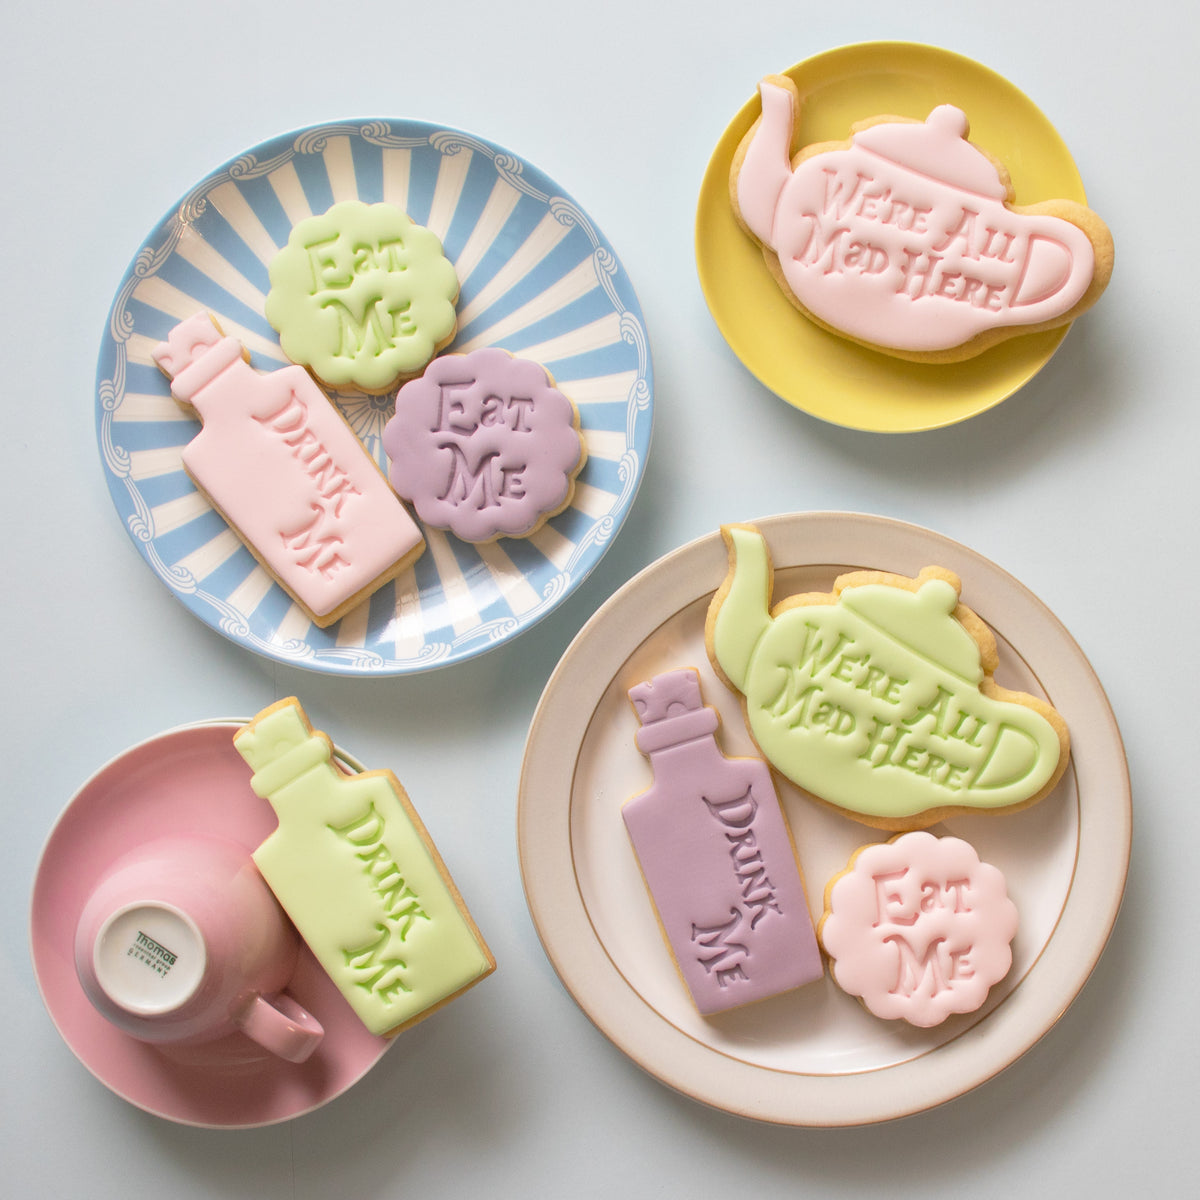 Set of 3 Eat Me, Drink Me, We are all Mad here Teapot Cookies